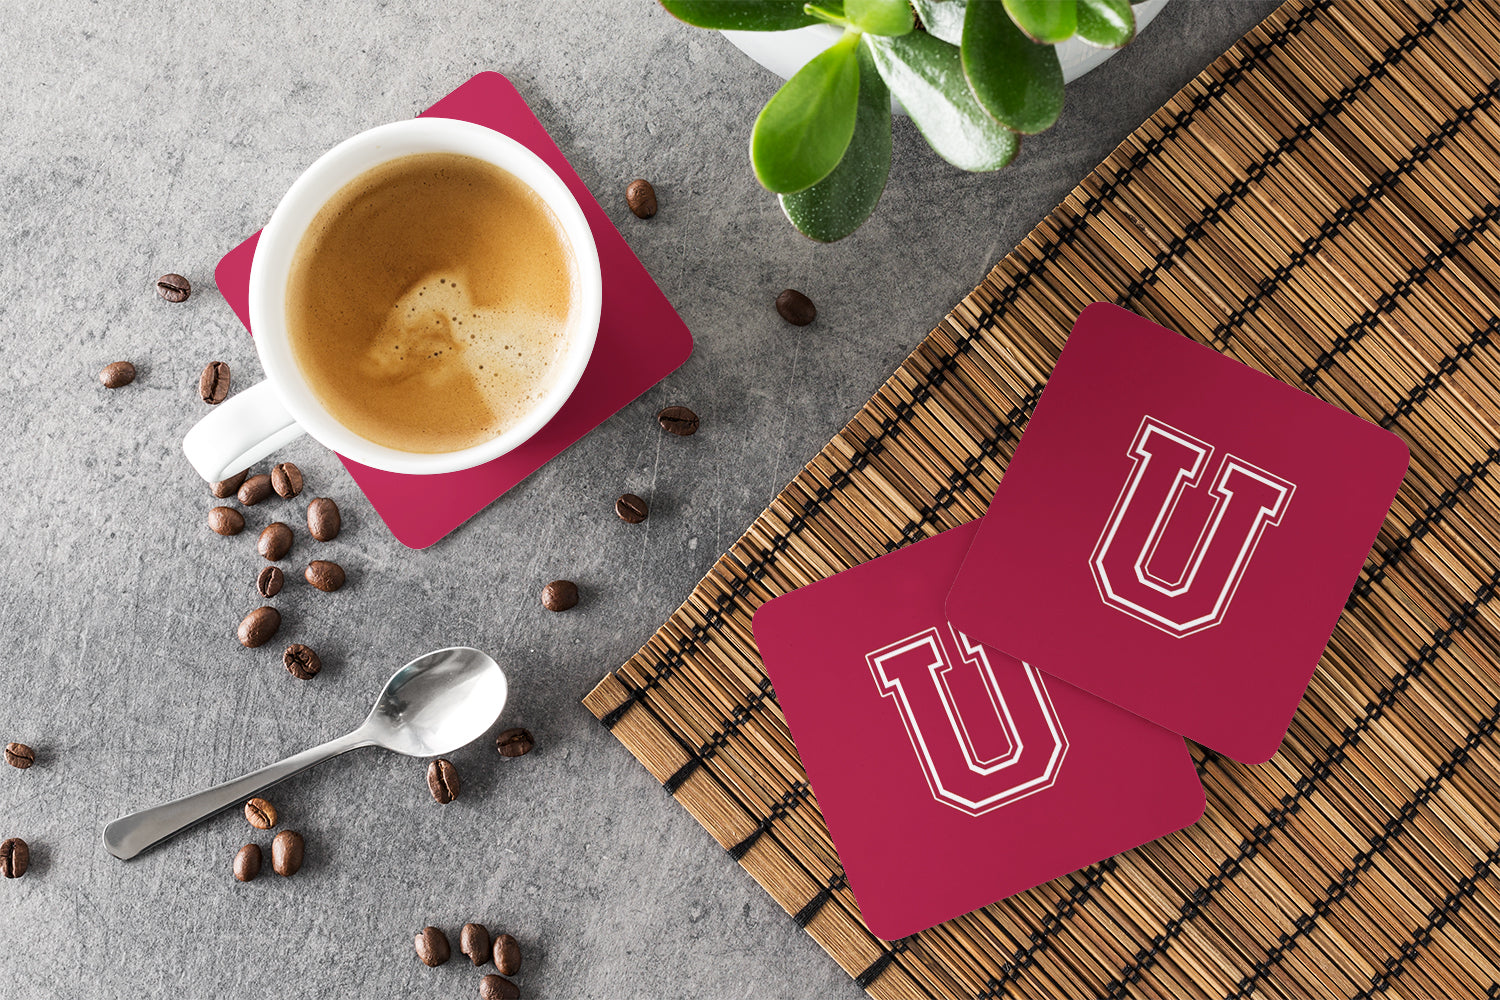 Set of 4 Monogram - Maroon and White Foam Coasters Initial Letter U - the-store.com